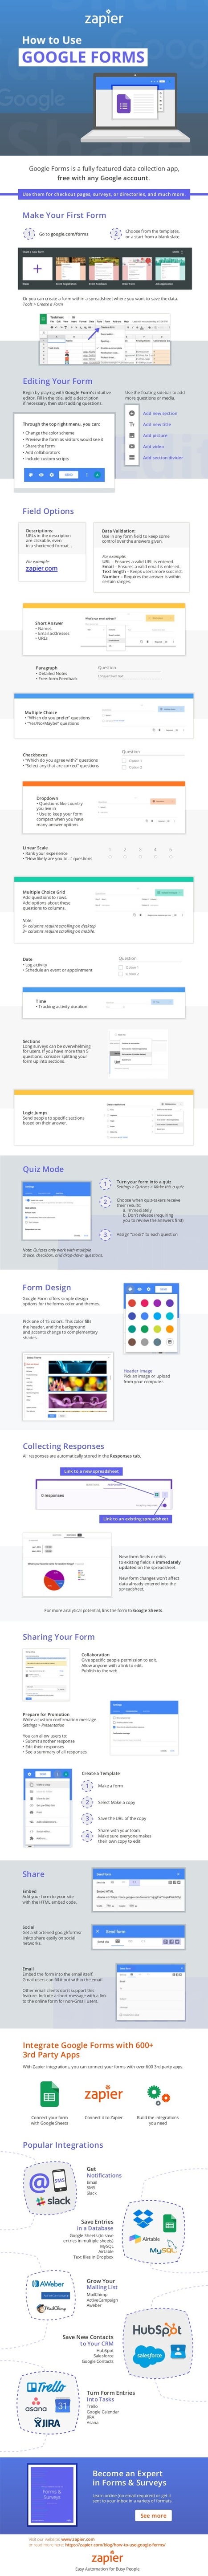 How to Use Google Forms #infographic | Moodle and Web 2.0 | Scoop.it